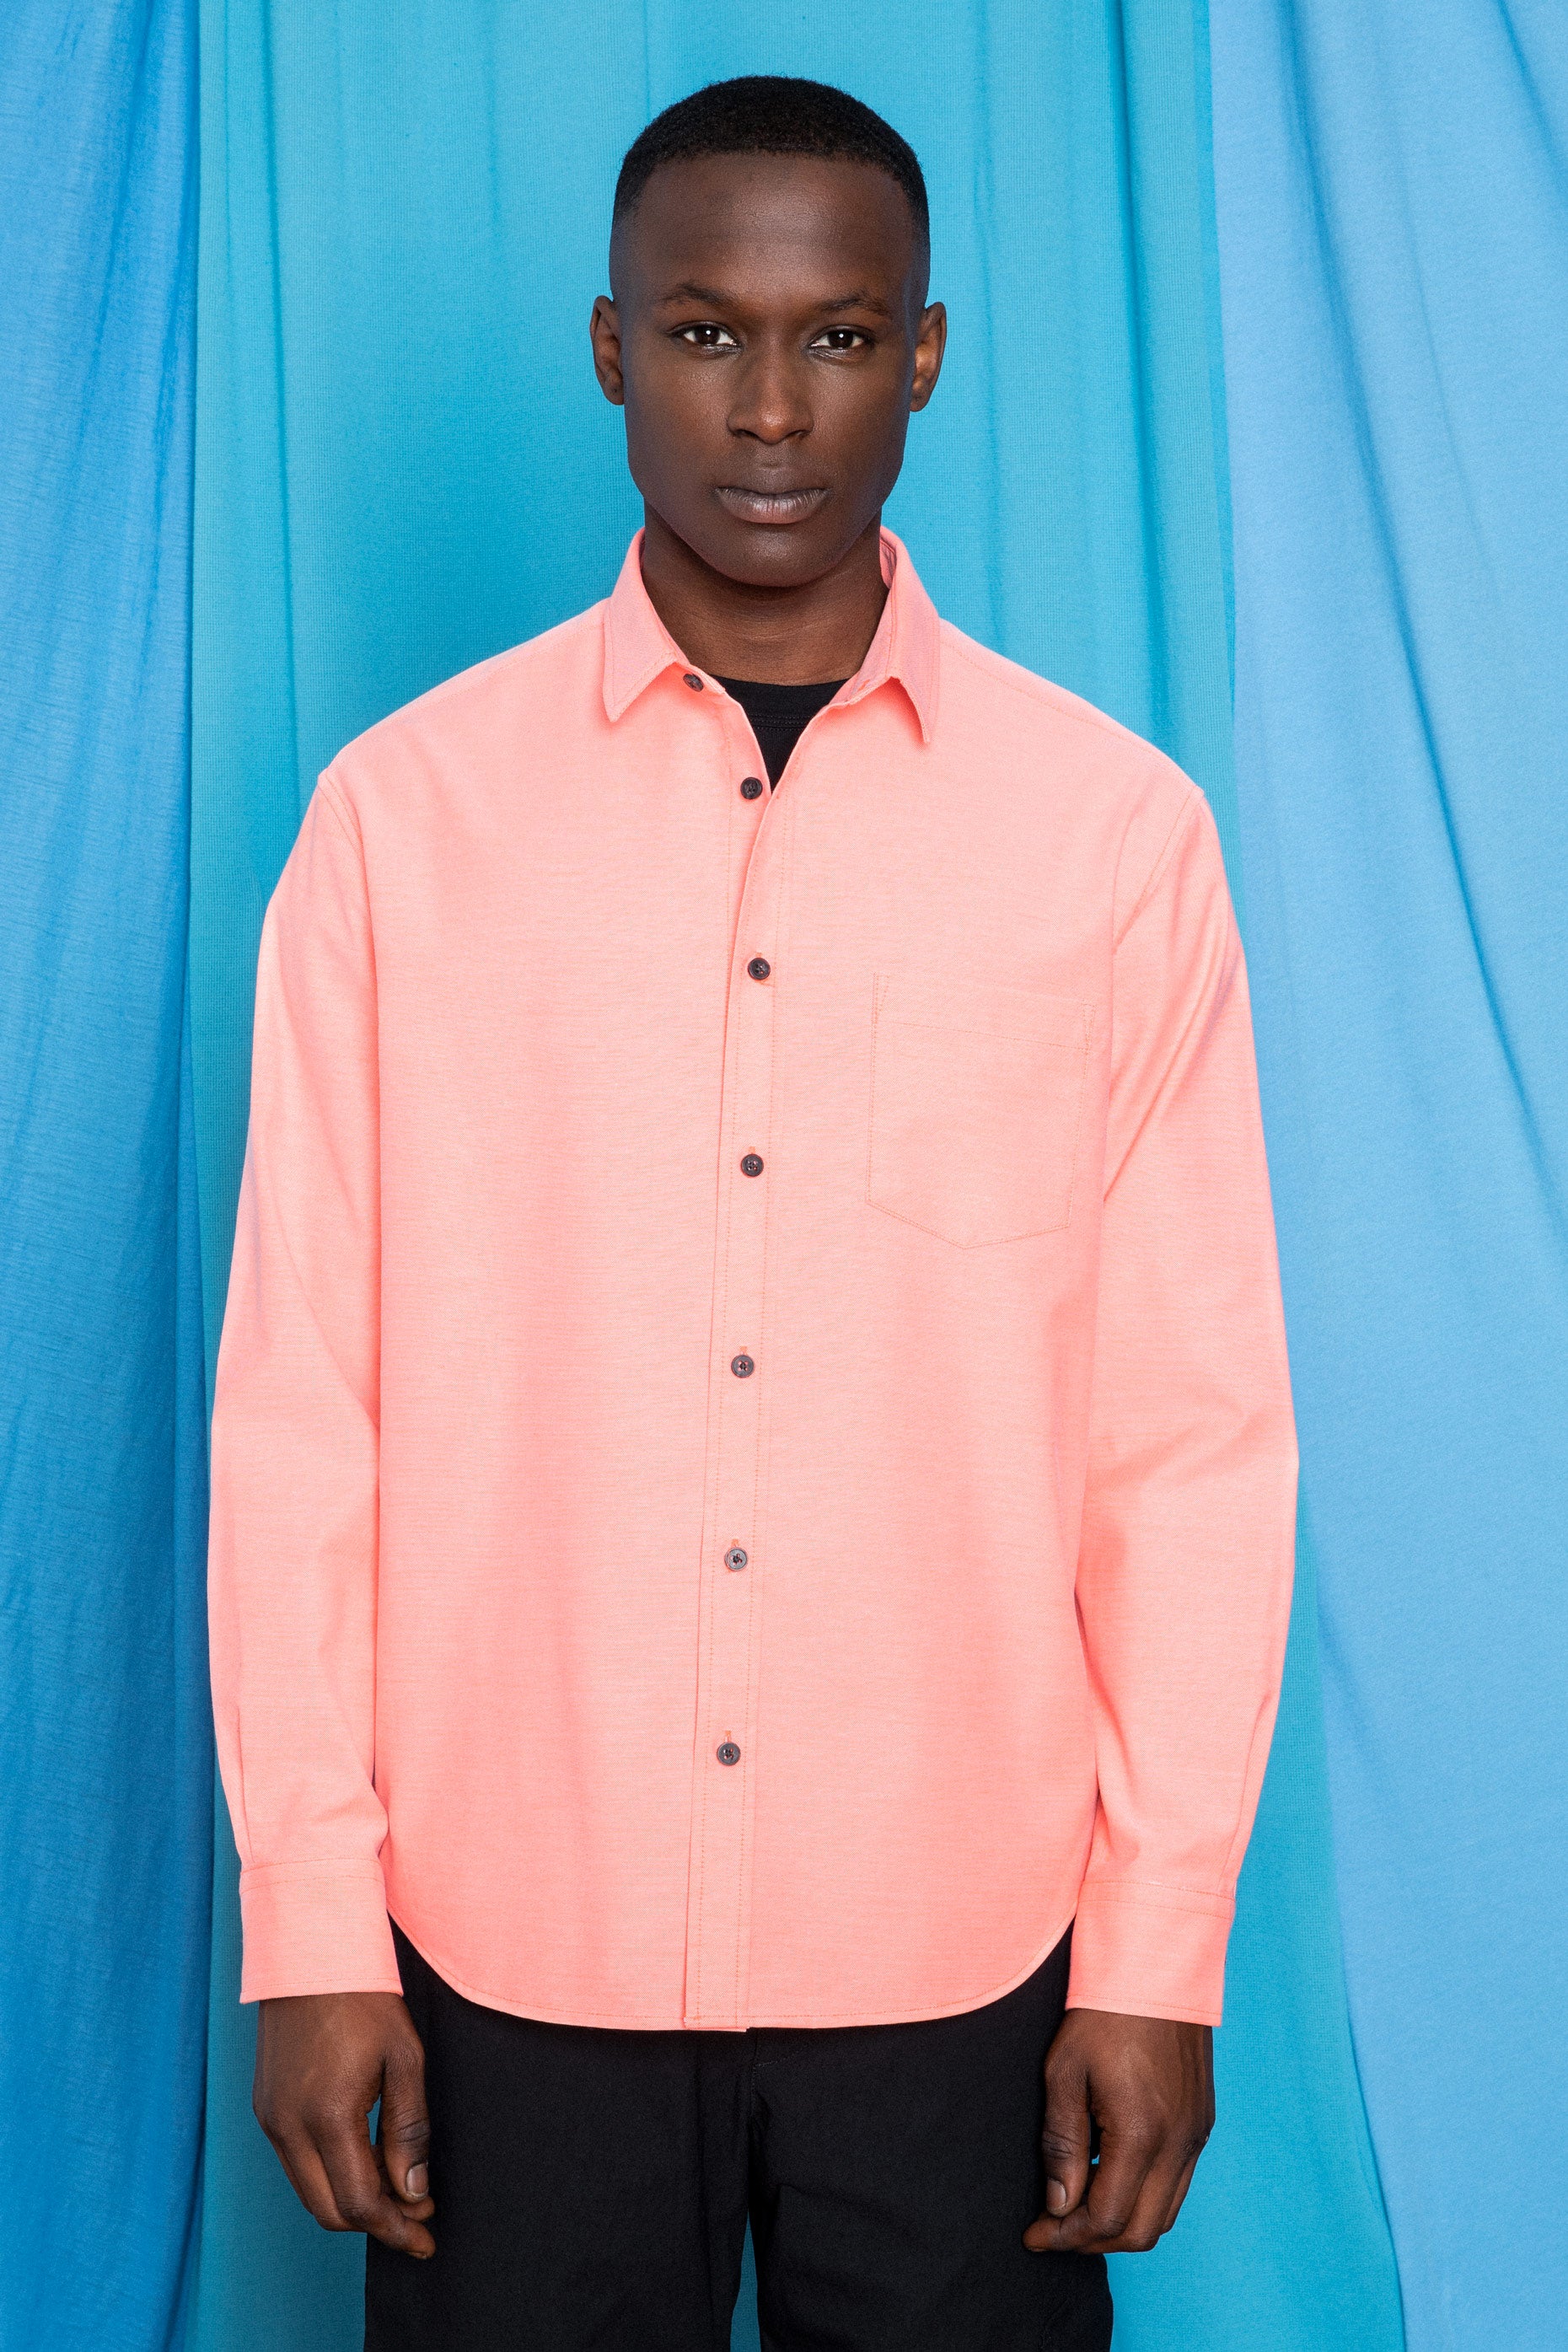 Full front fit image of Torey wearing the Experiment 253 - Fluoro Boxford in Coral